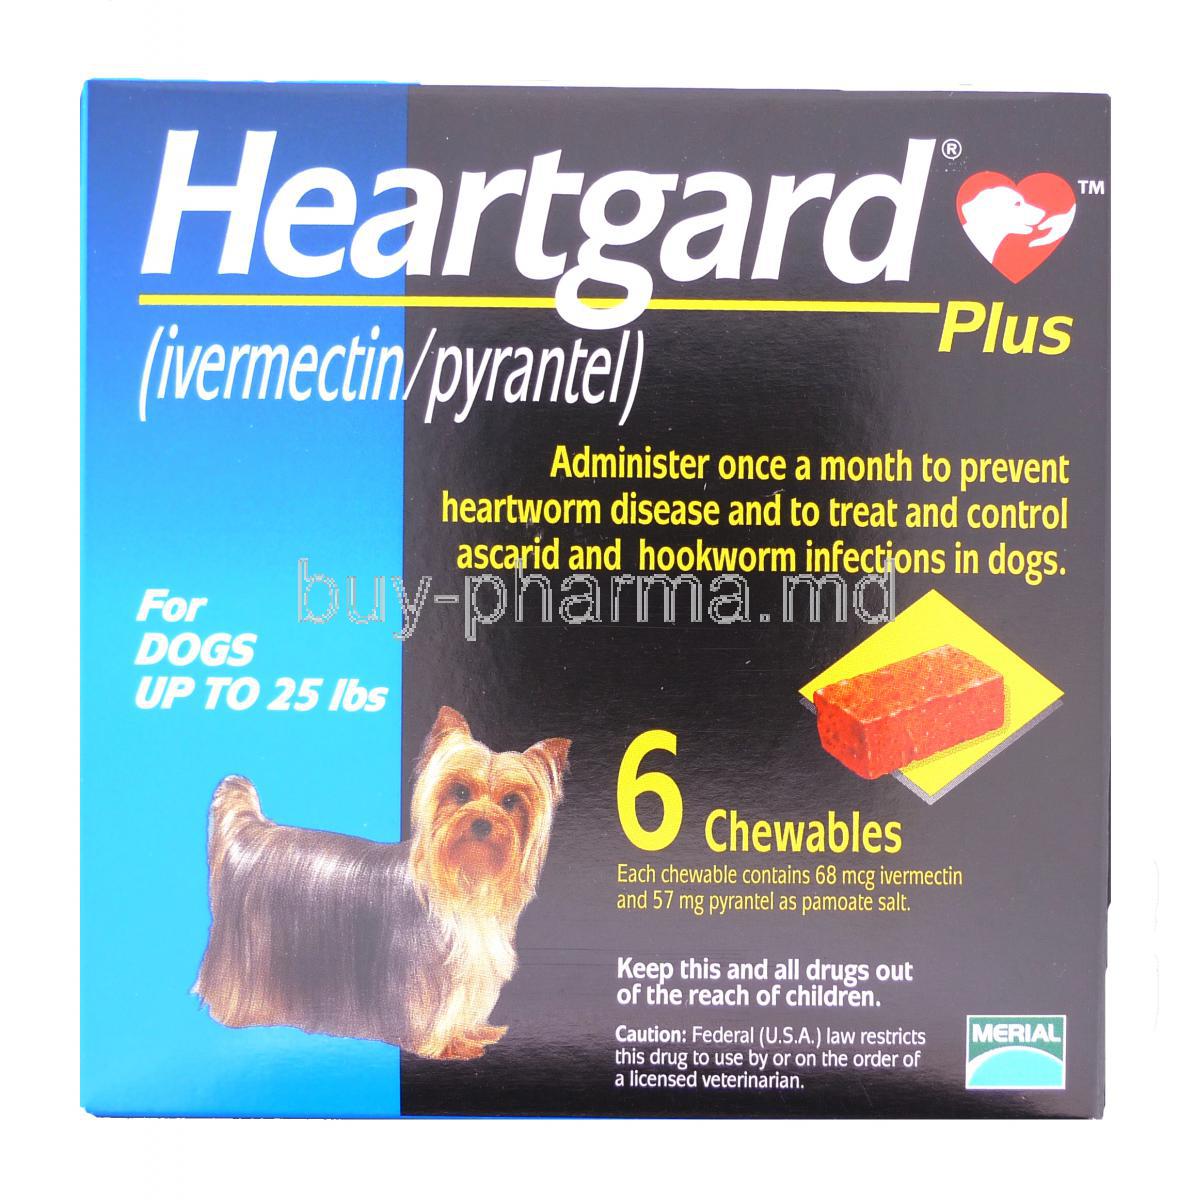 Heartcare Plus Chewable Ivermectin 68 mcg & Pyrantel Pamoate 57 mg  for Small dog (Up To 25lbs)